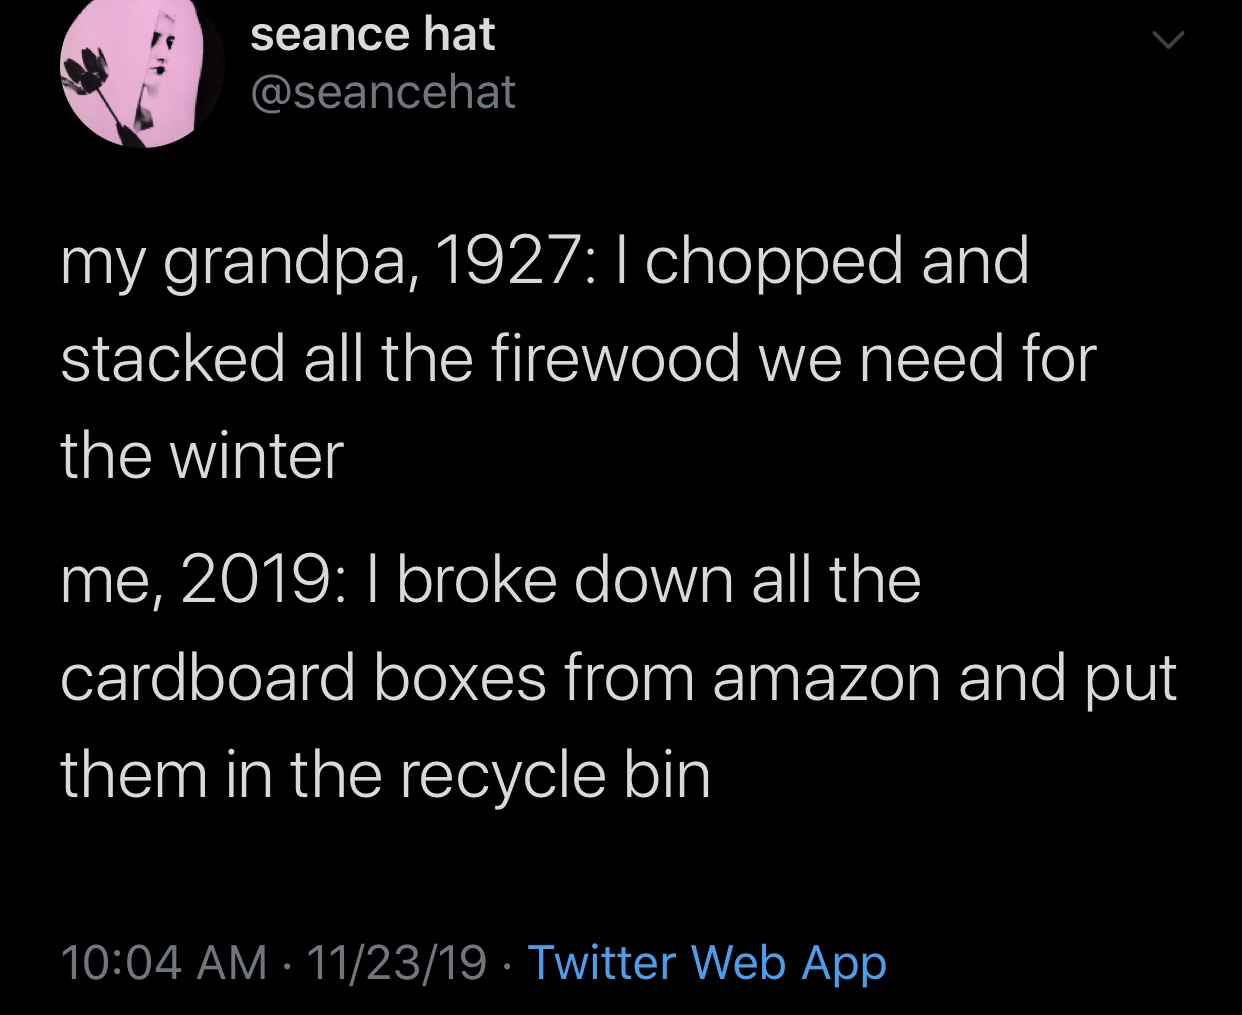 meme - angle - seance hat my grandpa, chopped and stacked all the firewood we need for the winter me, 2019 I broke down all the cardboard boxes from amazon and put them in the recycle bin 112319. Twitter Web App